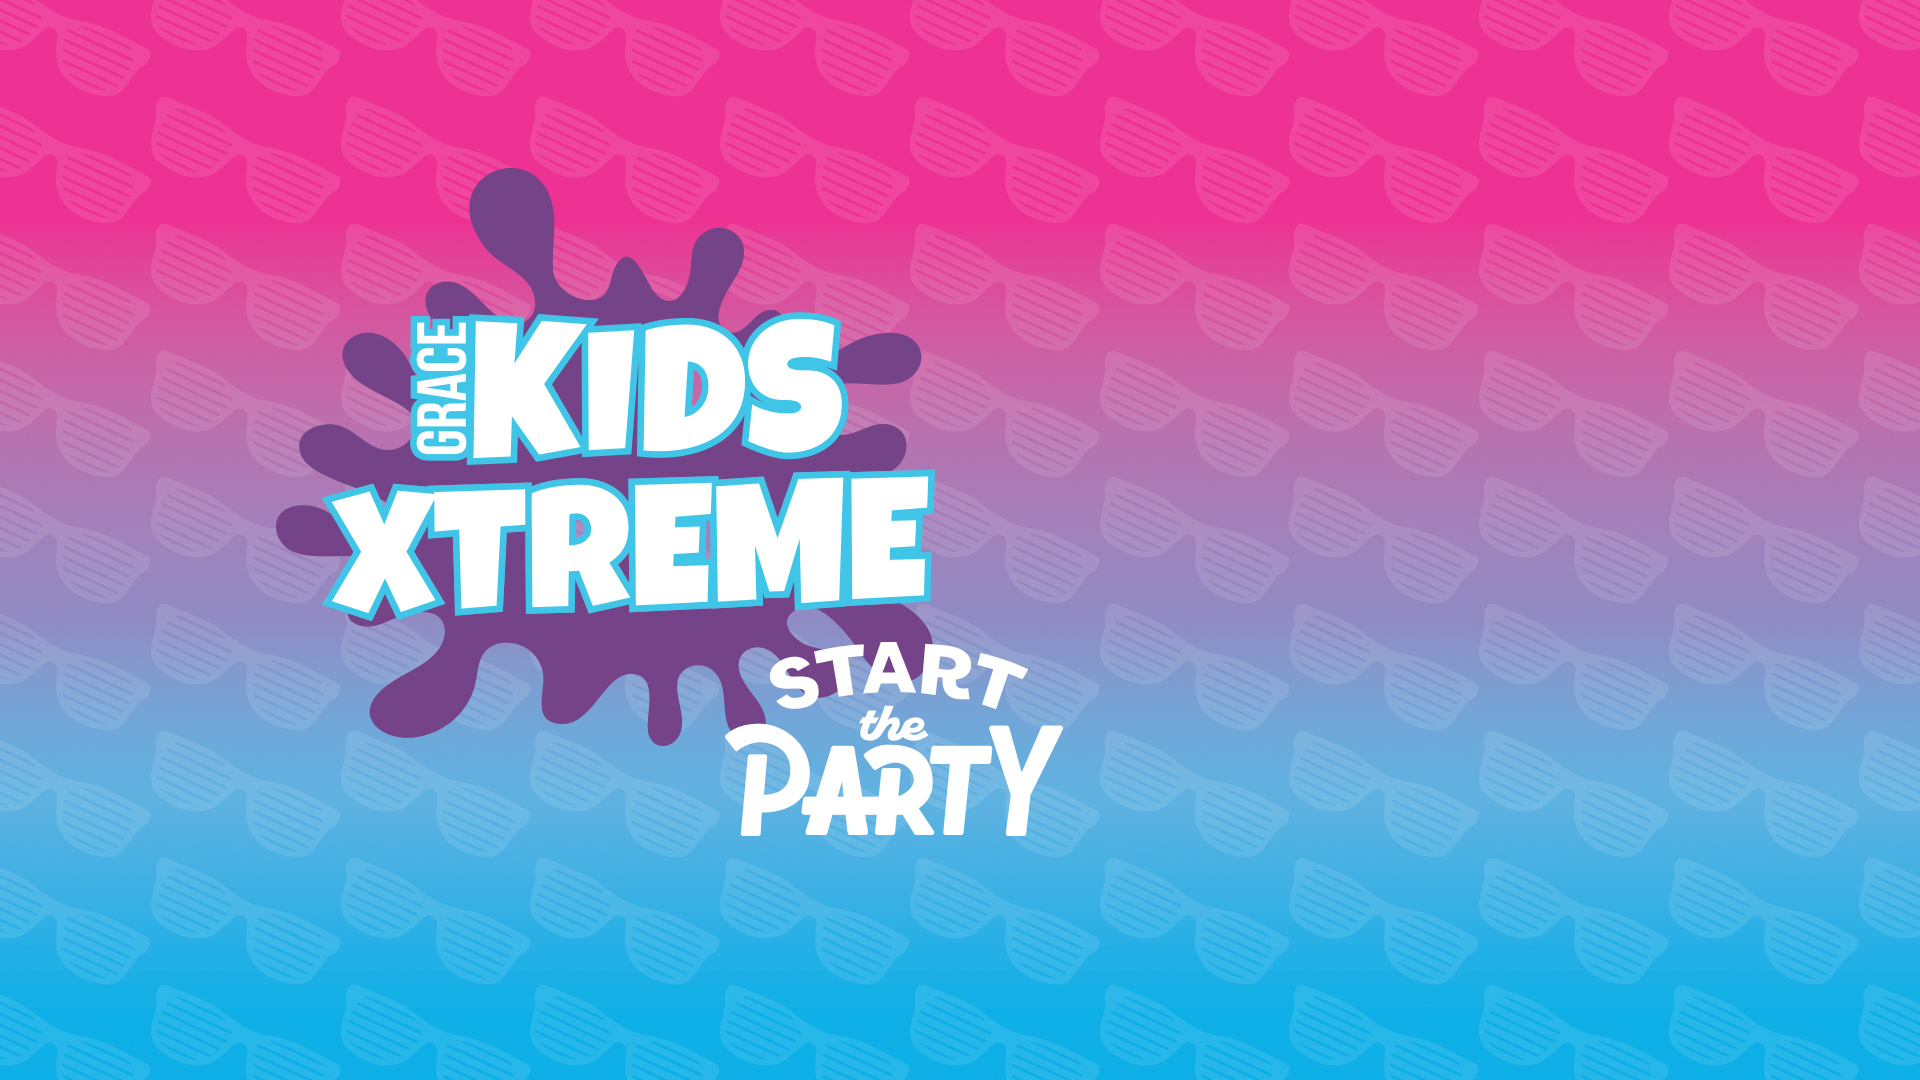 Grace Kids Xtreme

June 17-21
5:30 - 8:00pm
Forge Christian High School 
